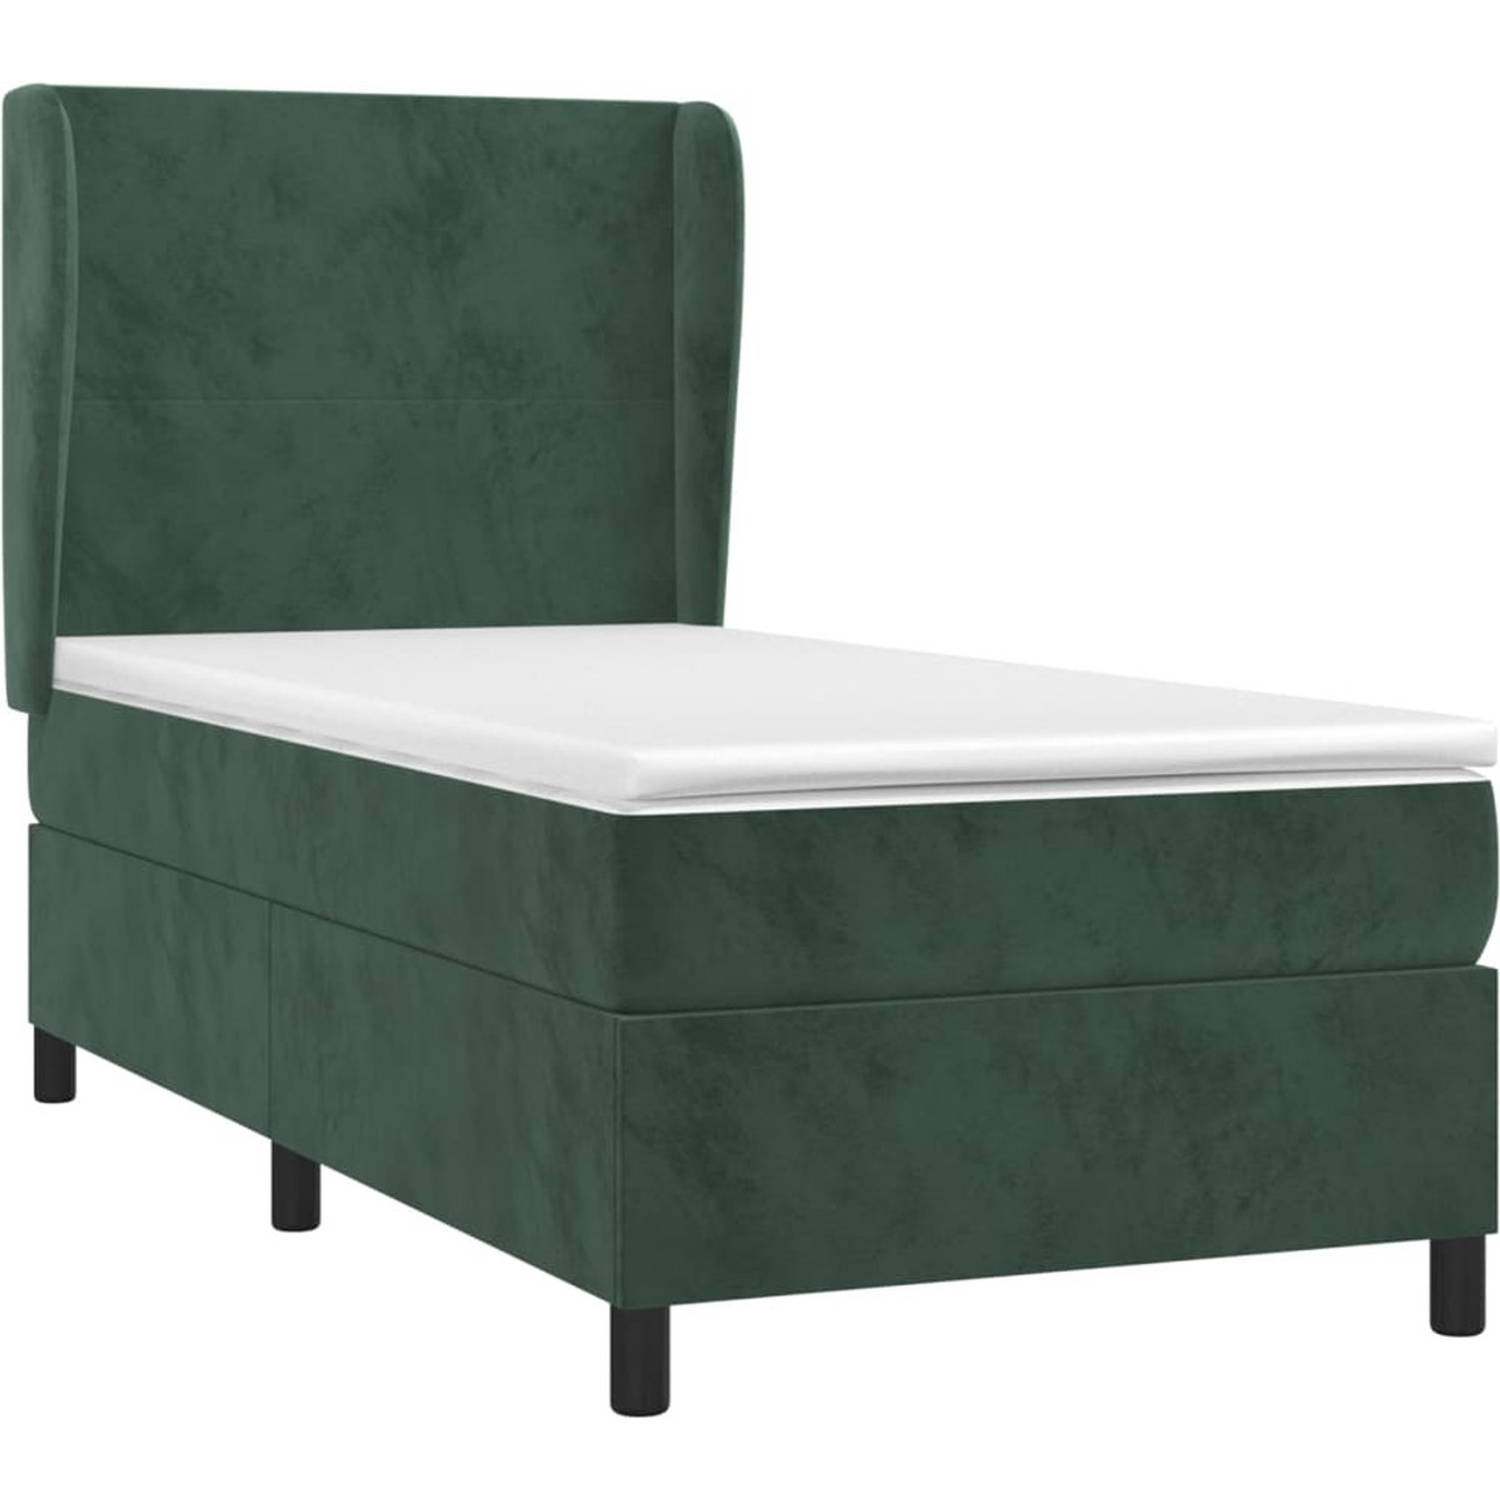 The Living Store Boxspringbed - Bed - 203 x 103 x 118/128 cm - Donkergroen Fluweel